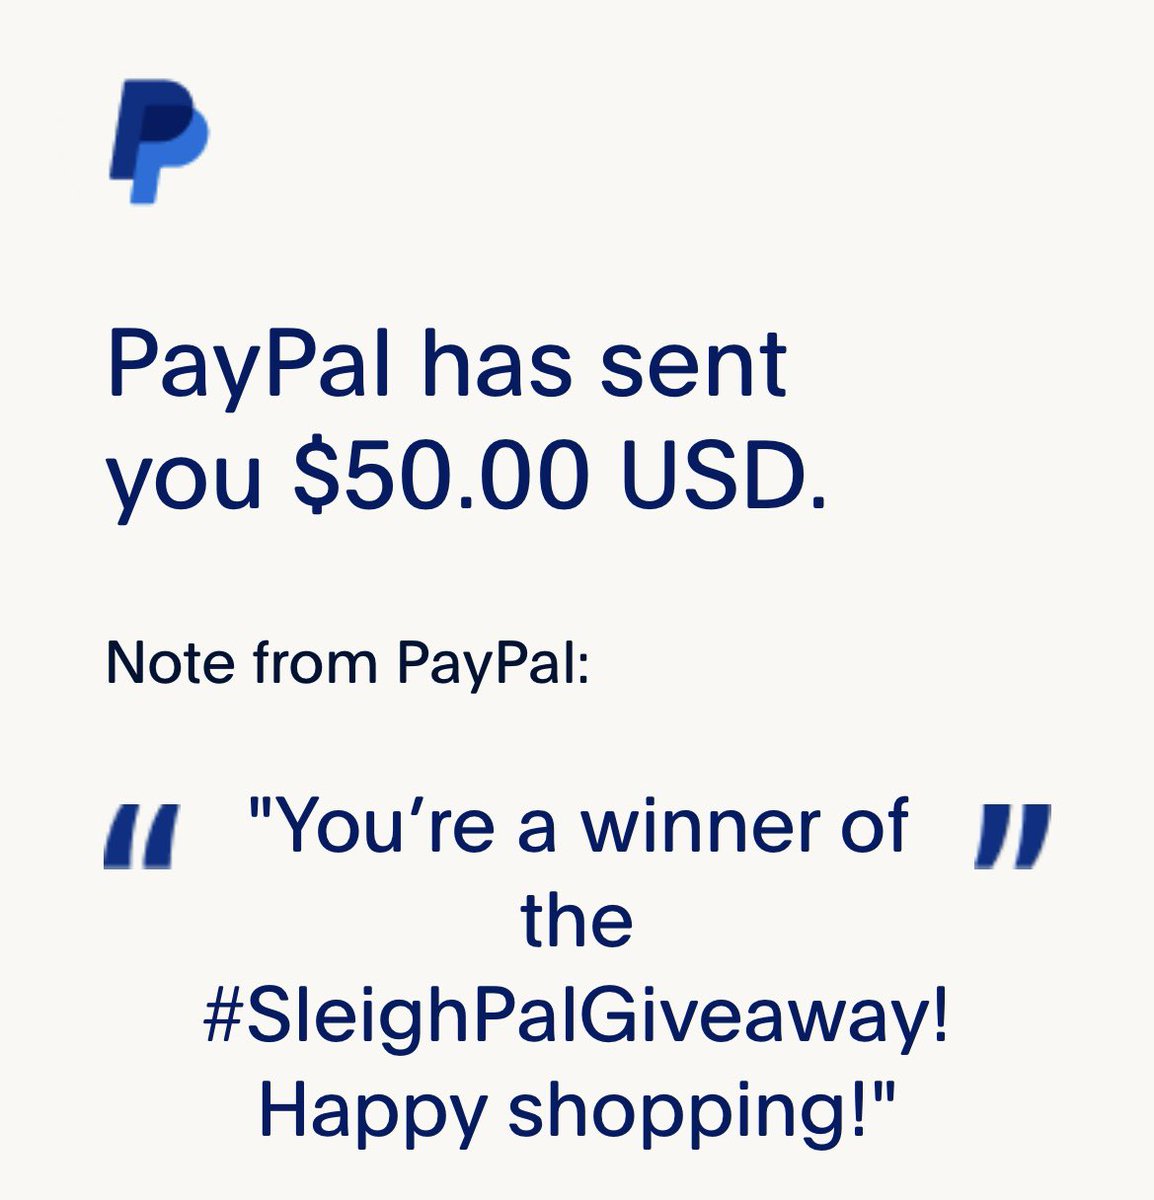 Thank you so much @PayPal I couldn’t believe I won!! Can’t say ‘Thank You’ enough. Made my week!!! #ItPaysToPayWithPayPal